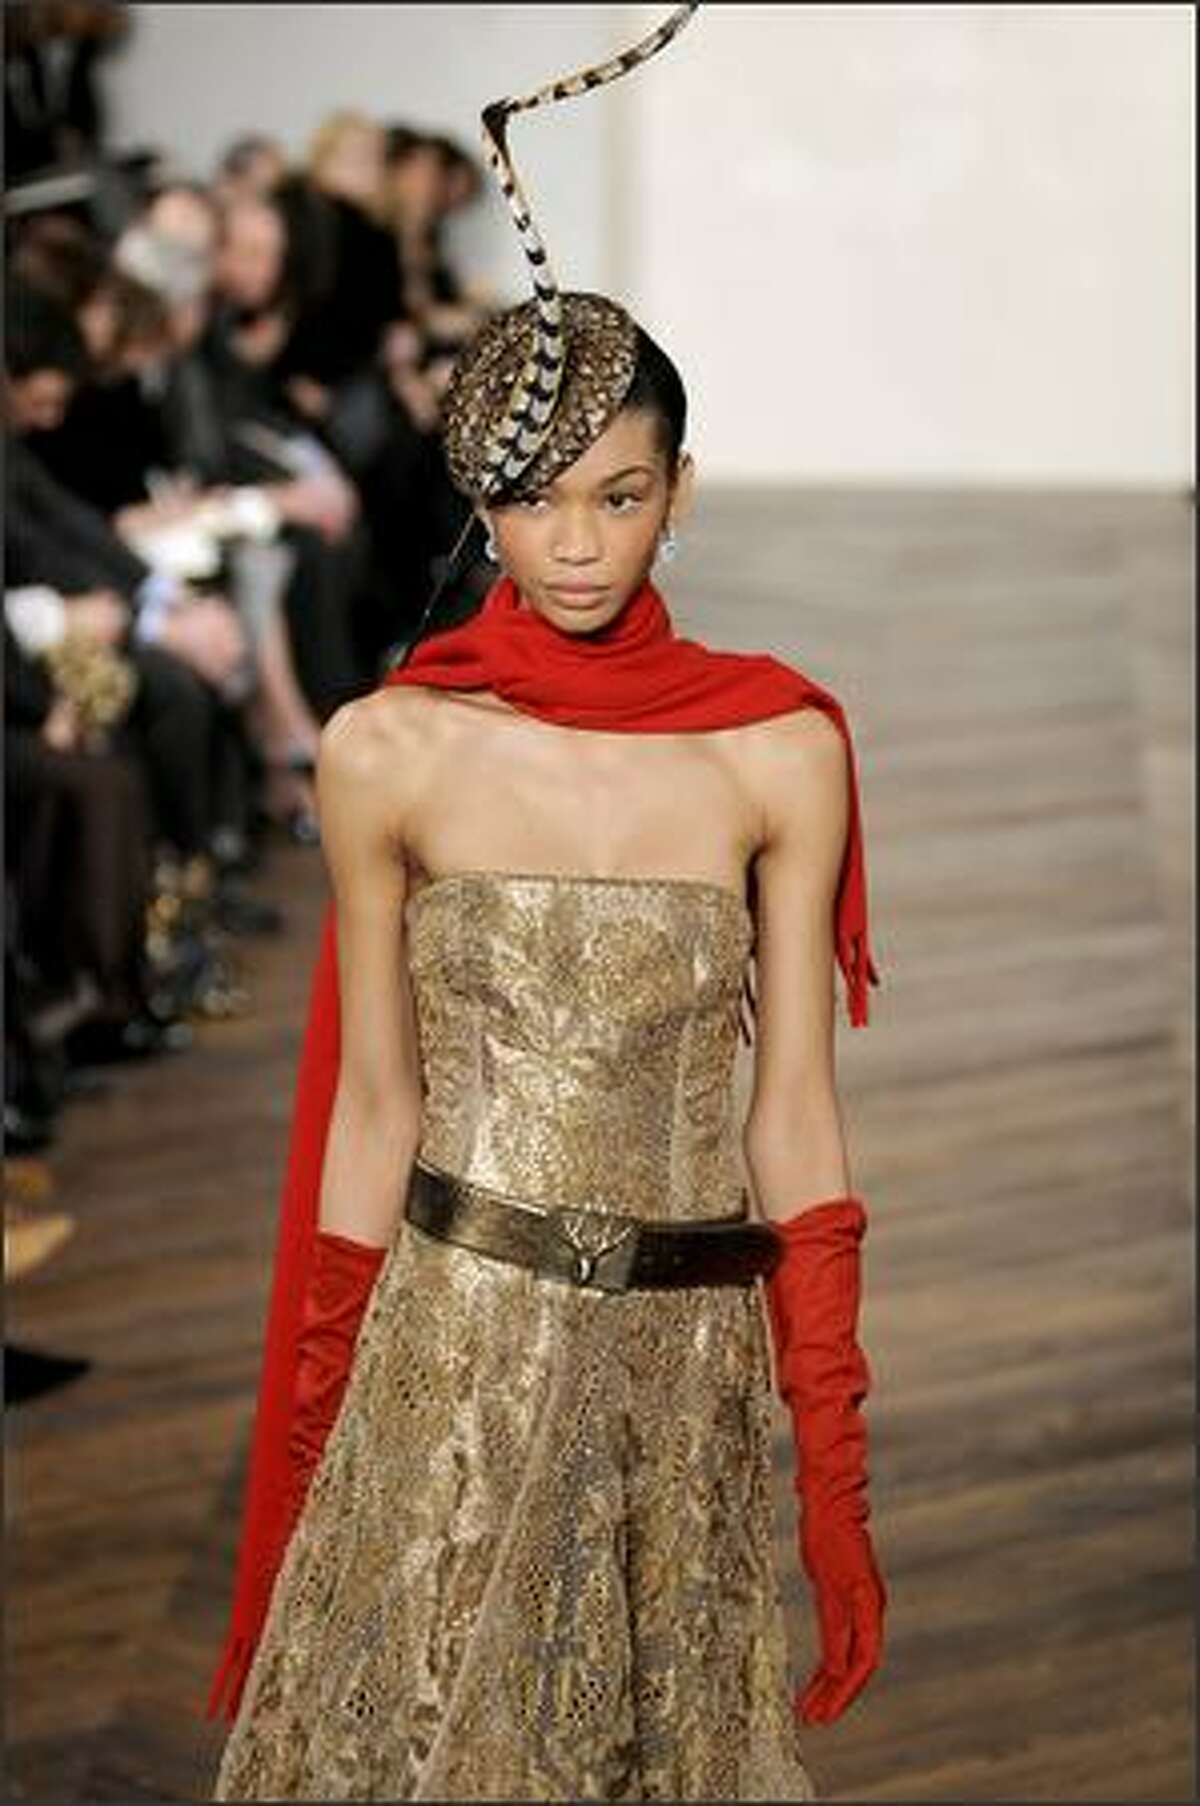 A model walks the runway at the Ralph Lauren Fall 2008 fashion show during Mercedes-Benz Fashion Week Fall 2008 at Skylight Studios in New York City.